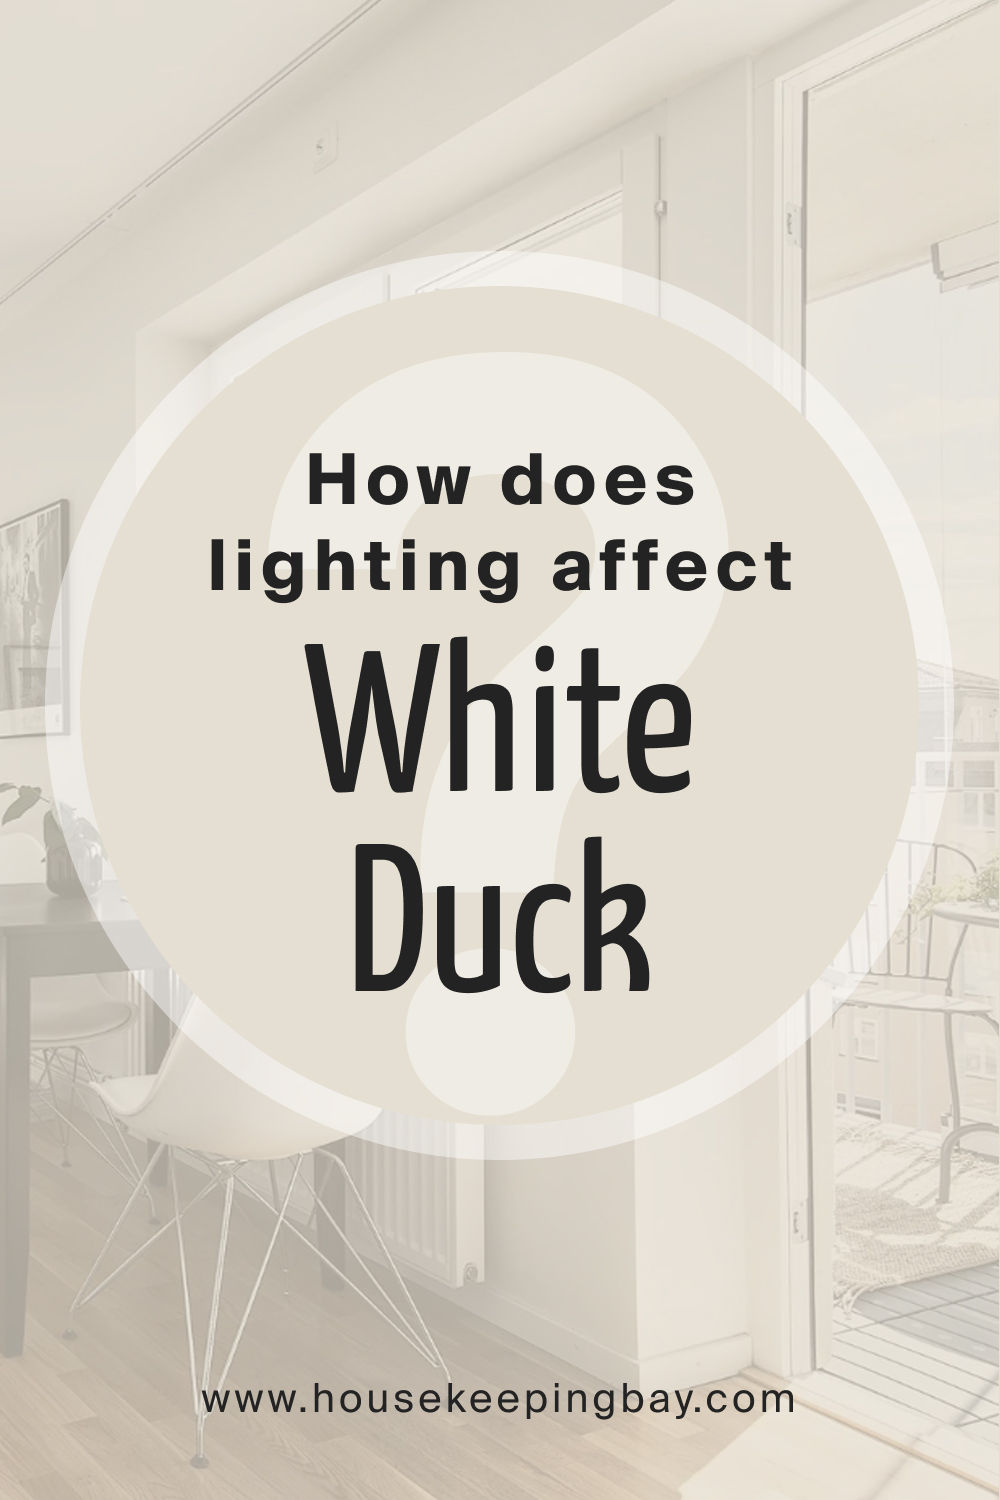 How does lighting affect SW White Duck